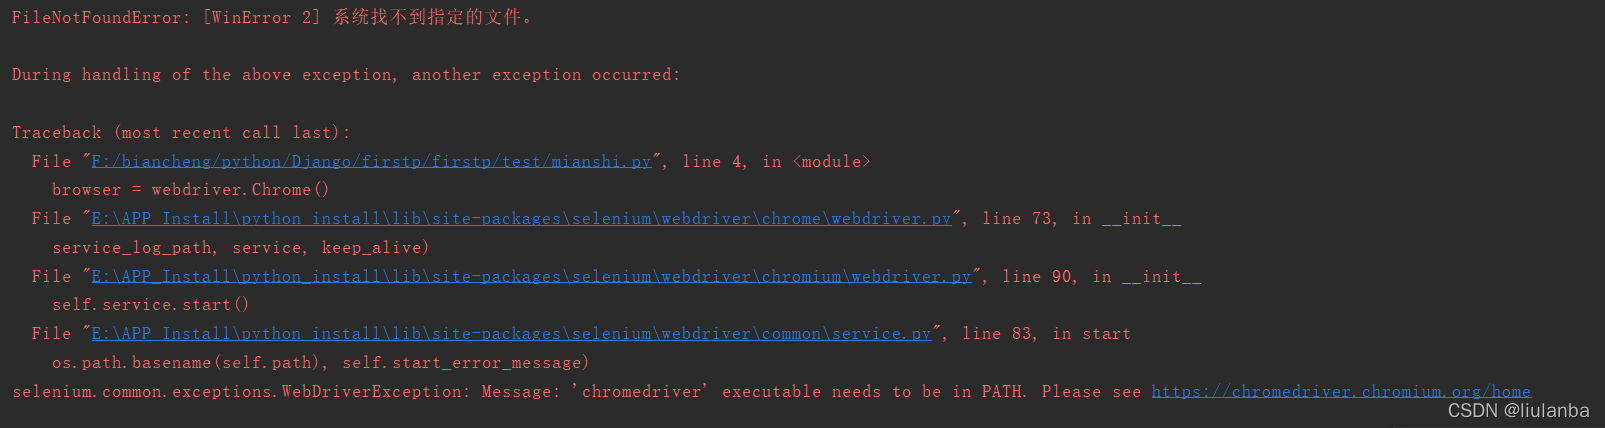 selenium. common. exceptions. WebDriverException: Message: ‘chromedriver‘ executable needs to be in PAT